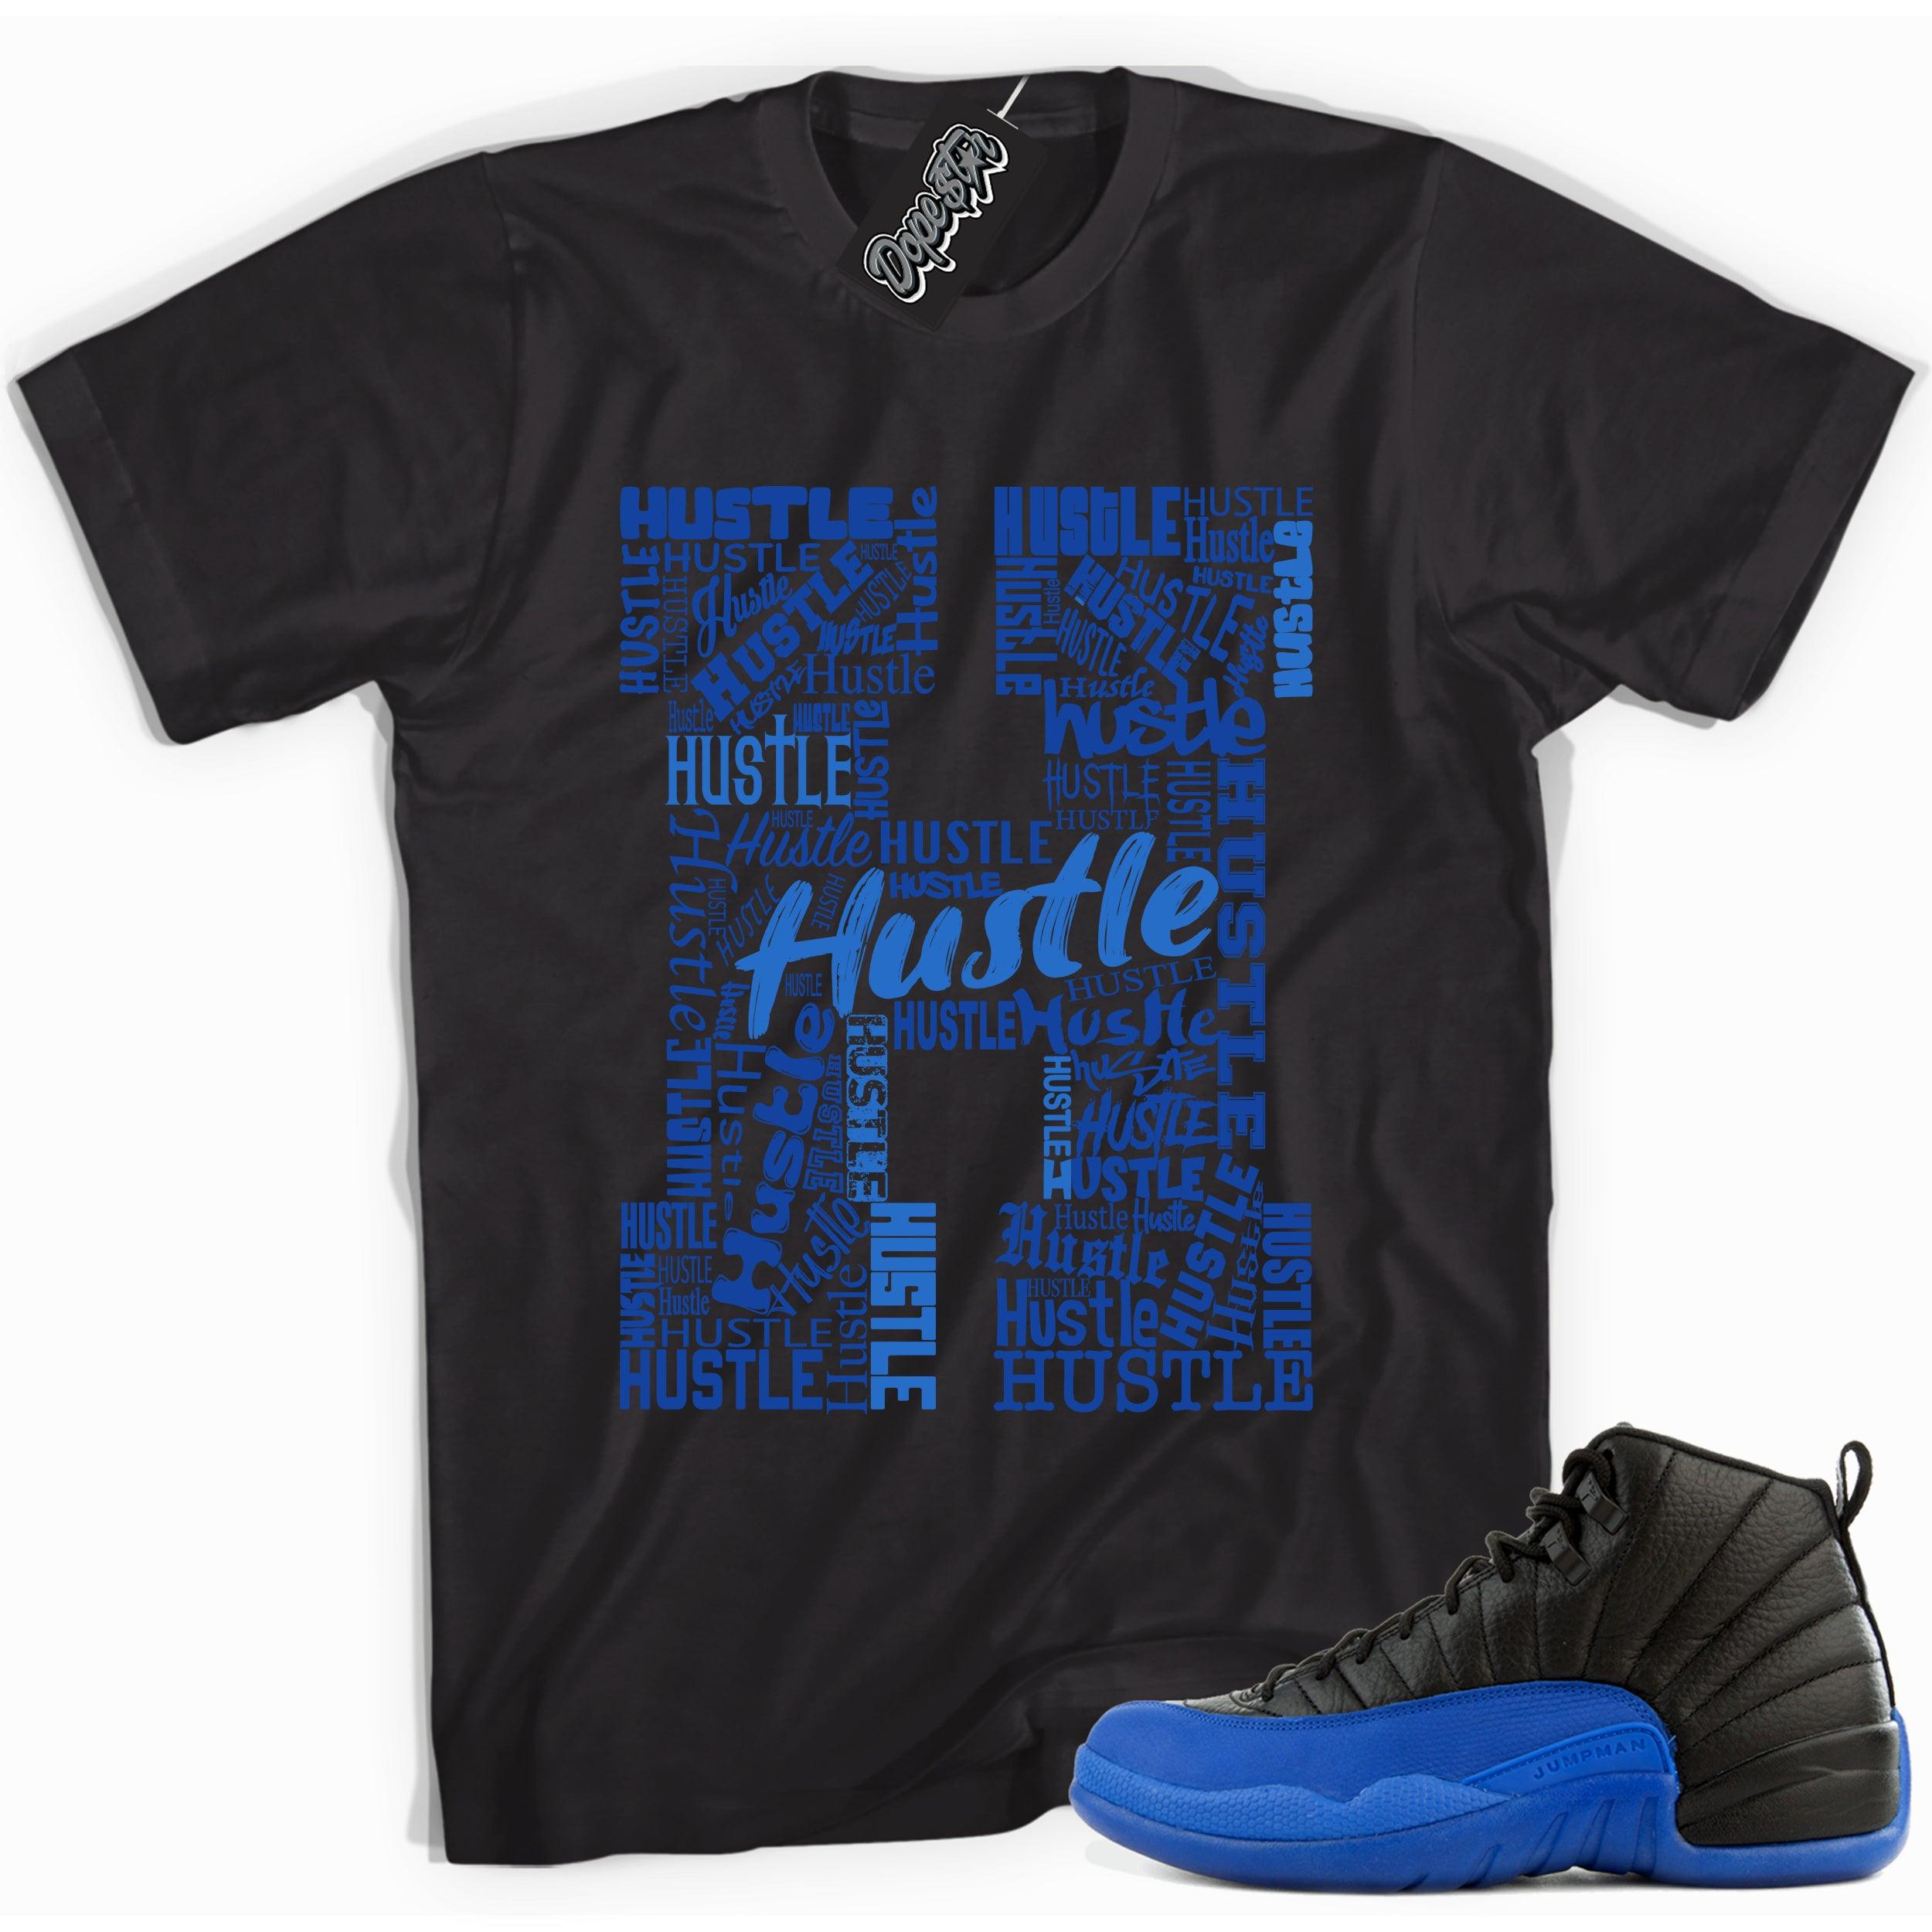 Cool black graphic tee with 'hustle' print, that perfectly matches  Air Jordan 12 Retro Black Game Royal sneakers.